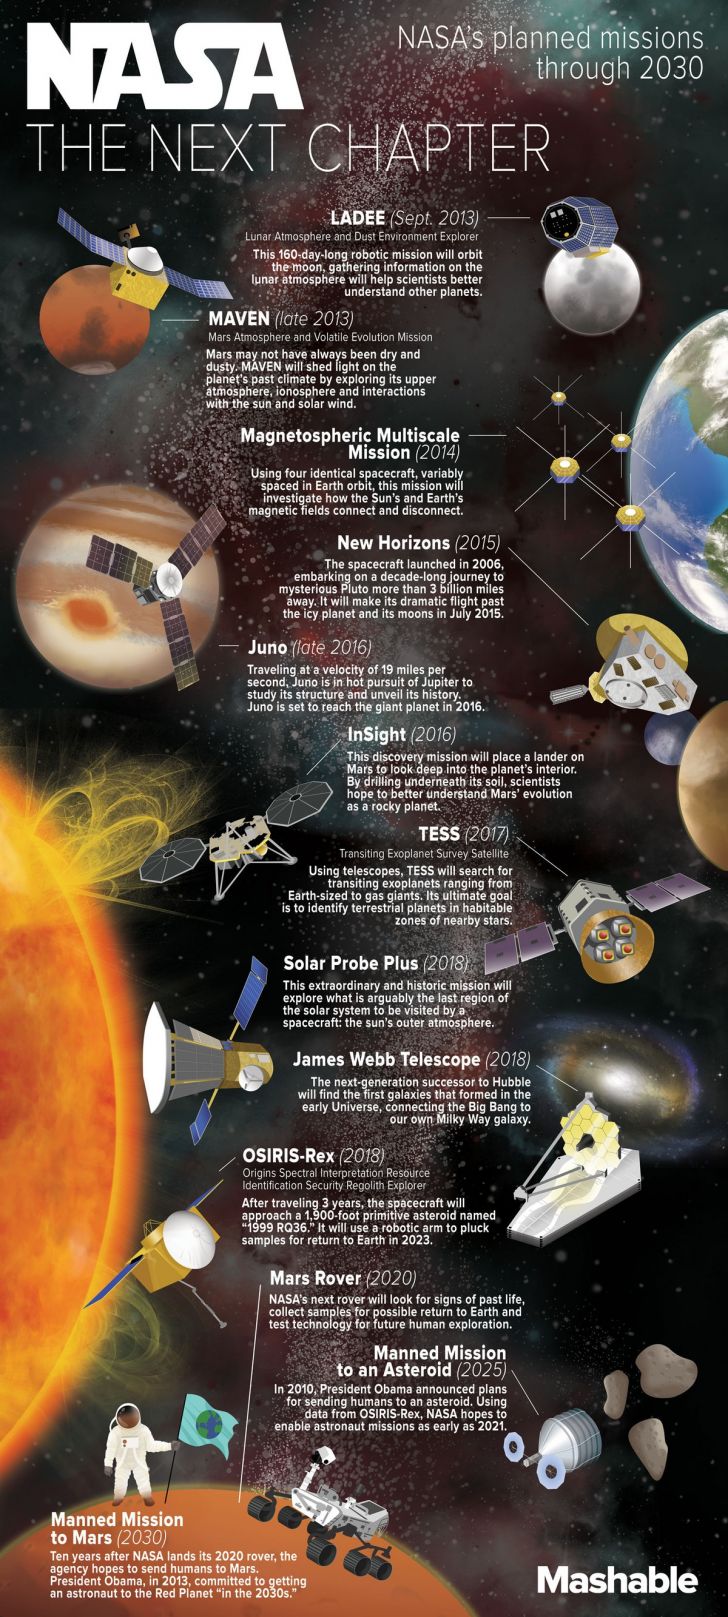 NASA's planned missions through 2030